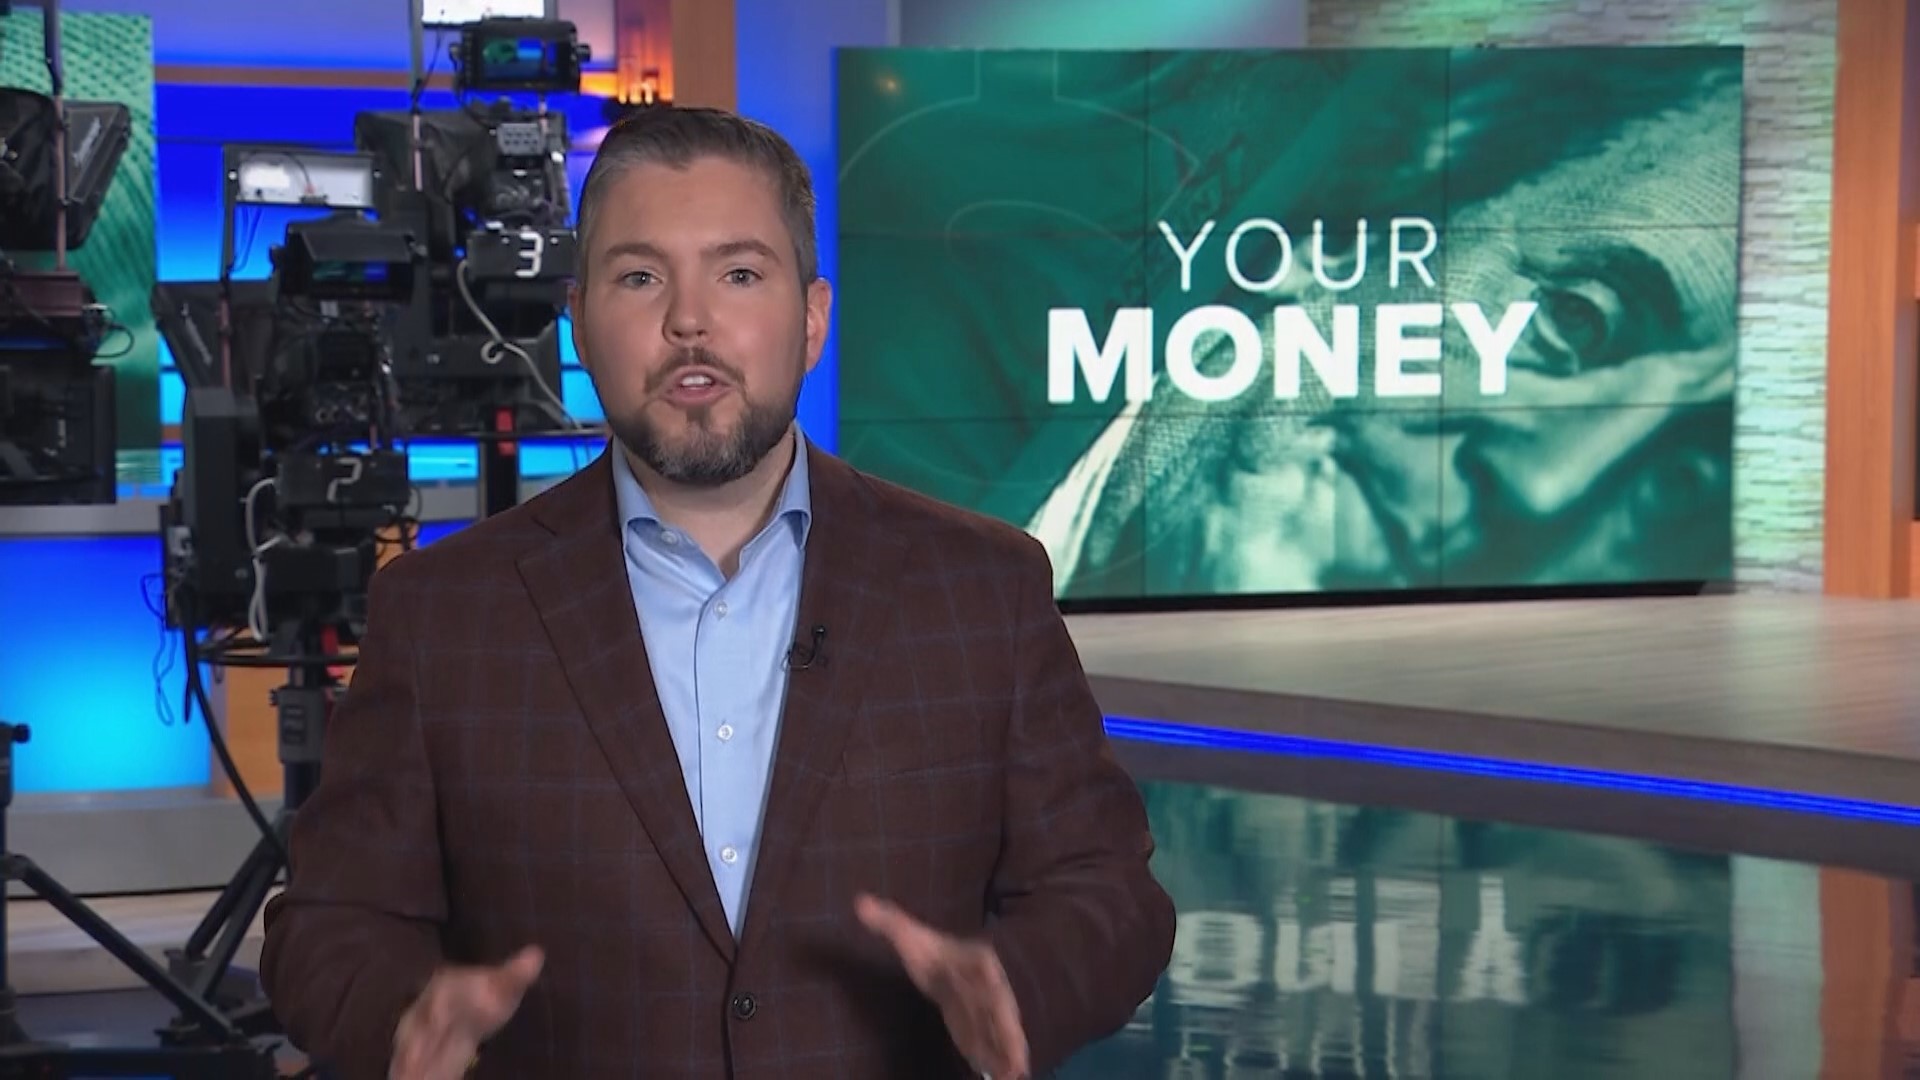 Your Money streaming on KARE 11+